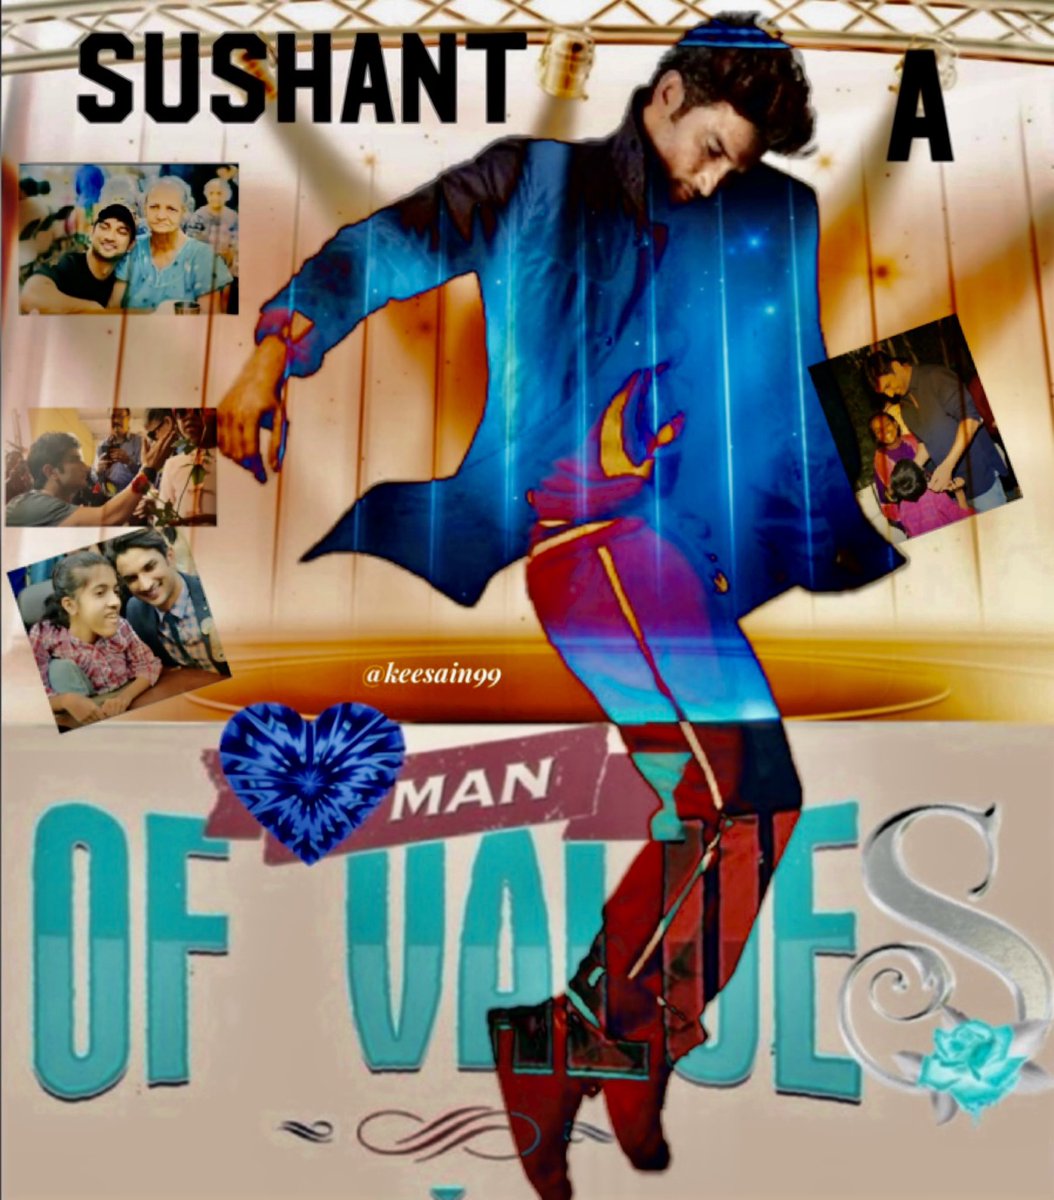 Sushant A Man Of Values 💖

His Reel Story seems like the fairy tale 'From Rags to Riches'

But his 'Real Story' is that of sheer dedication, determination & hard work to rise & accomplish the impossible. It’s an inspirational journey of courage, kindness, compassion & humanity.